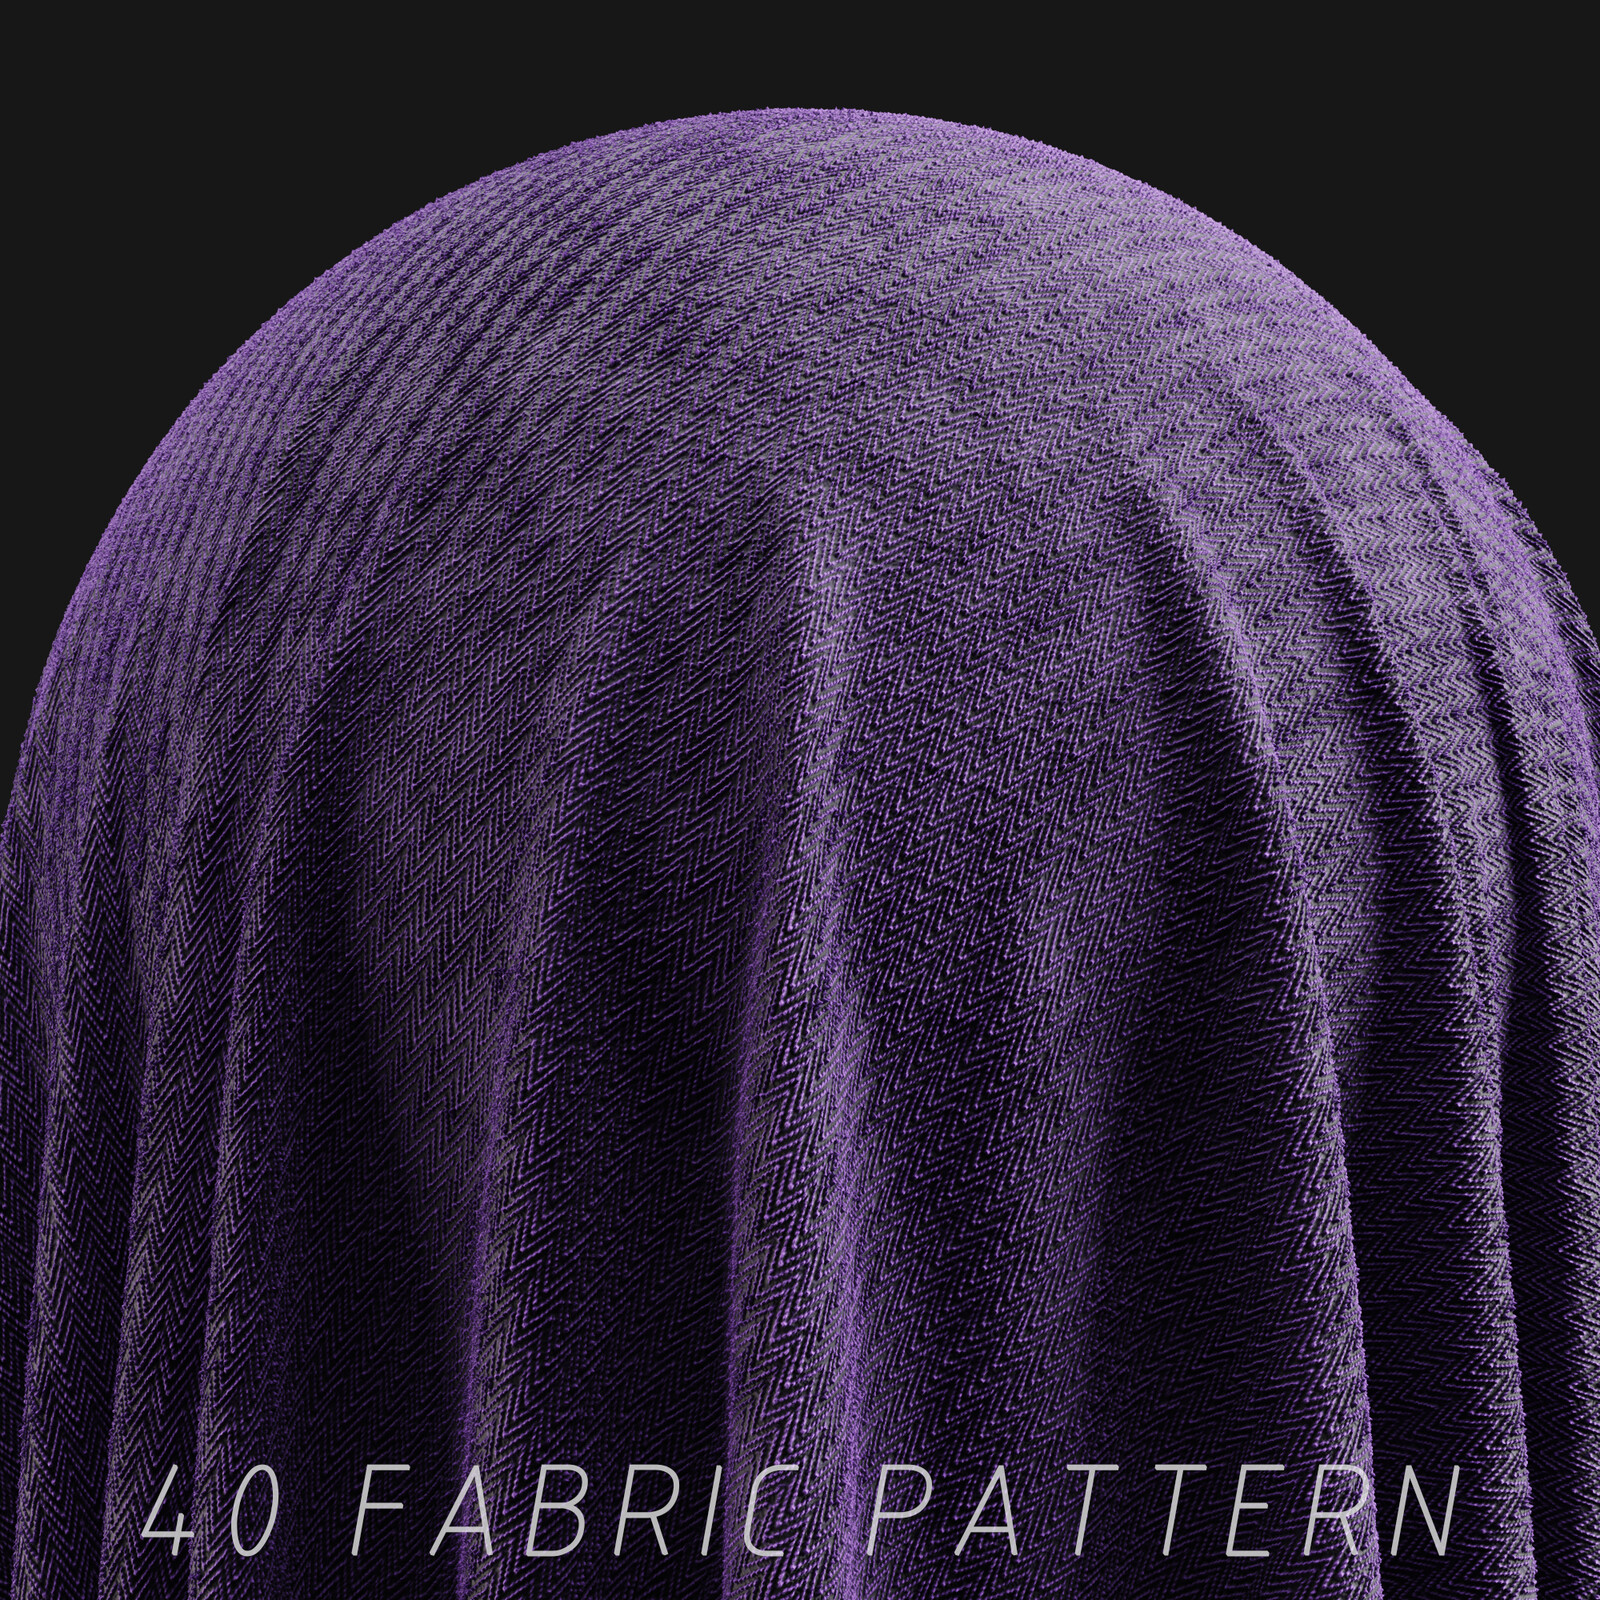 40 Fabric / Cloth Pattern (Tileable) Vol.2